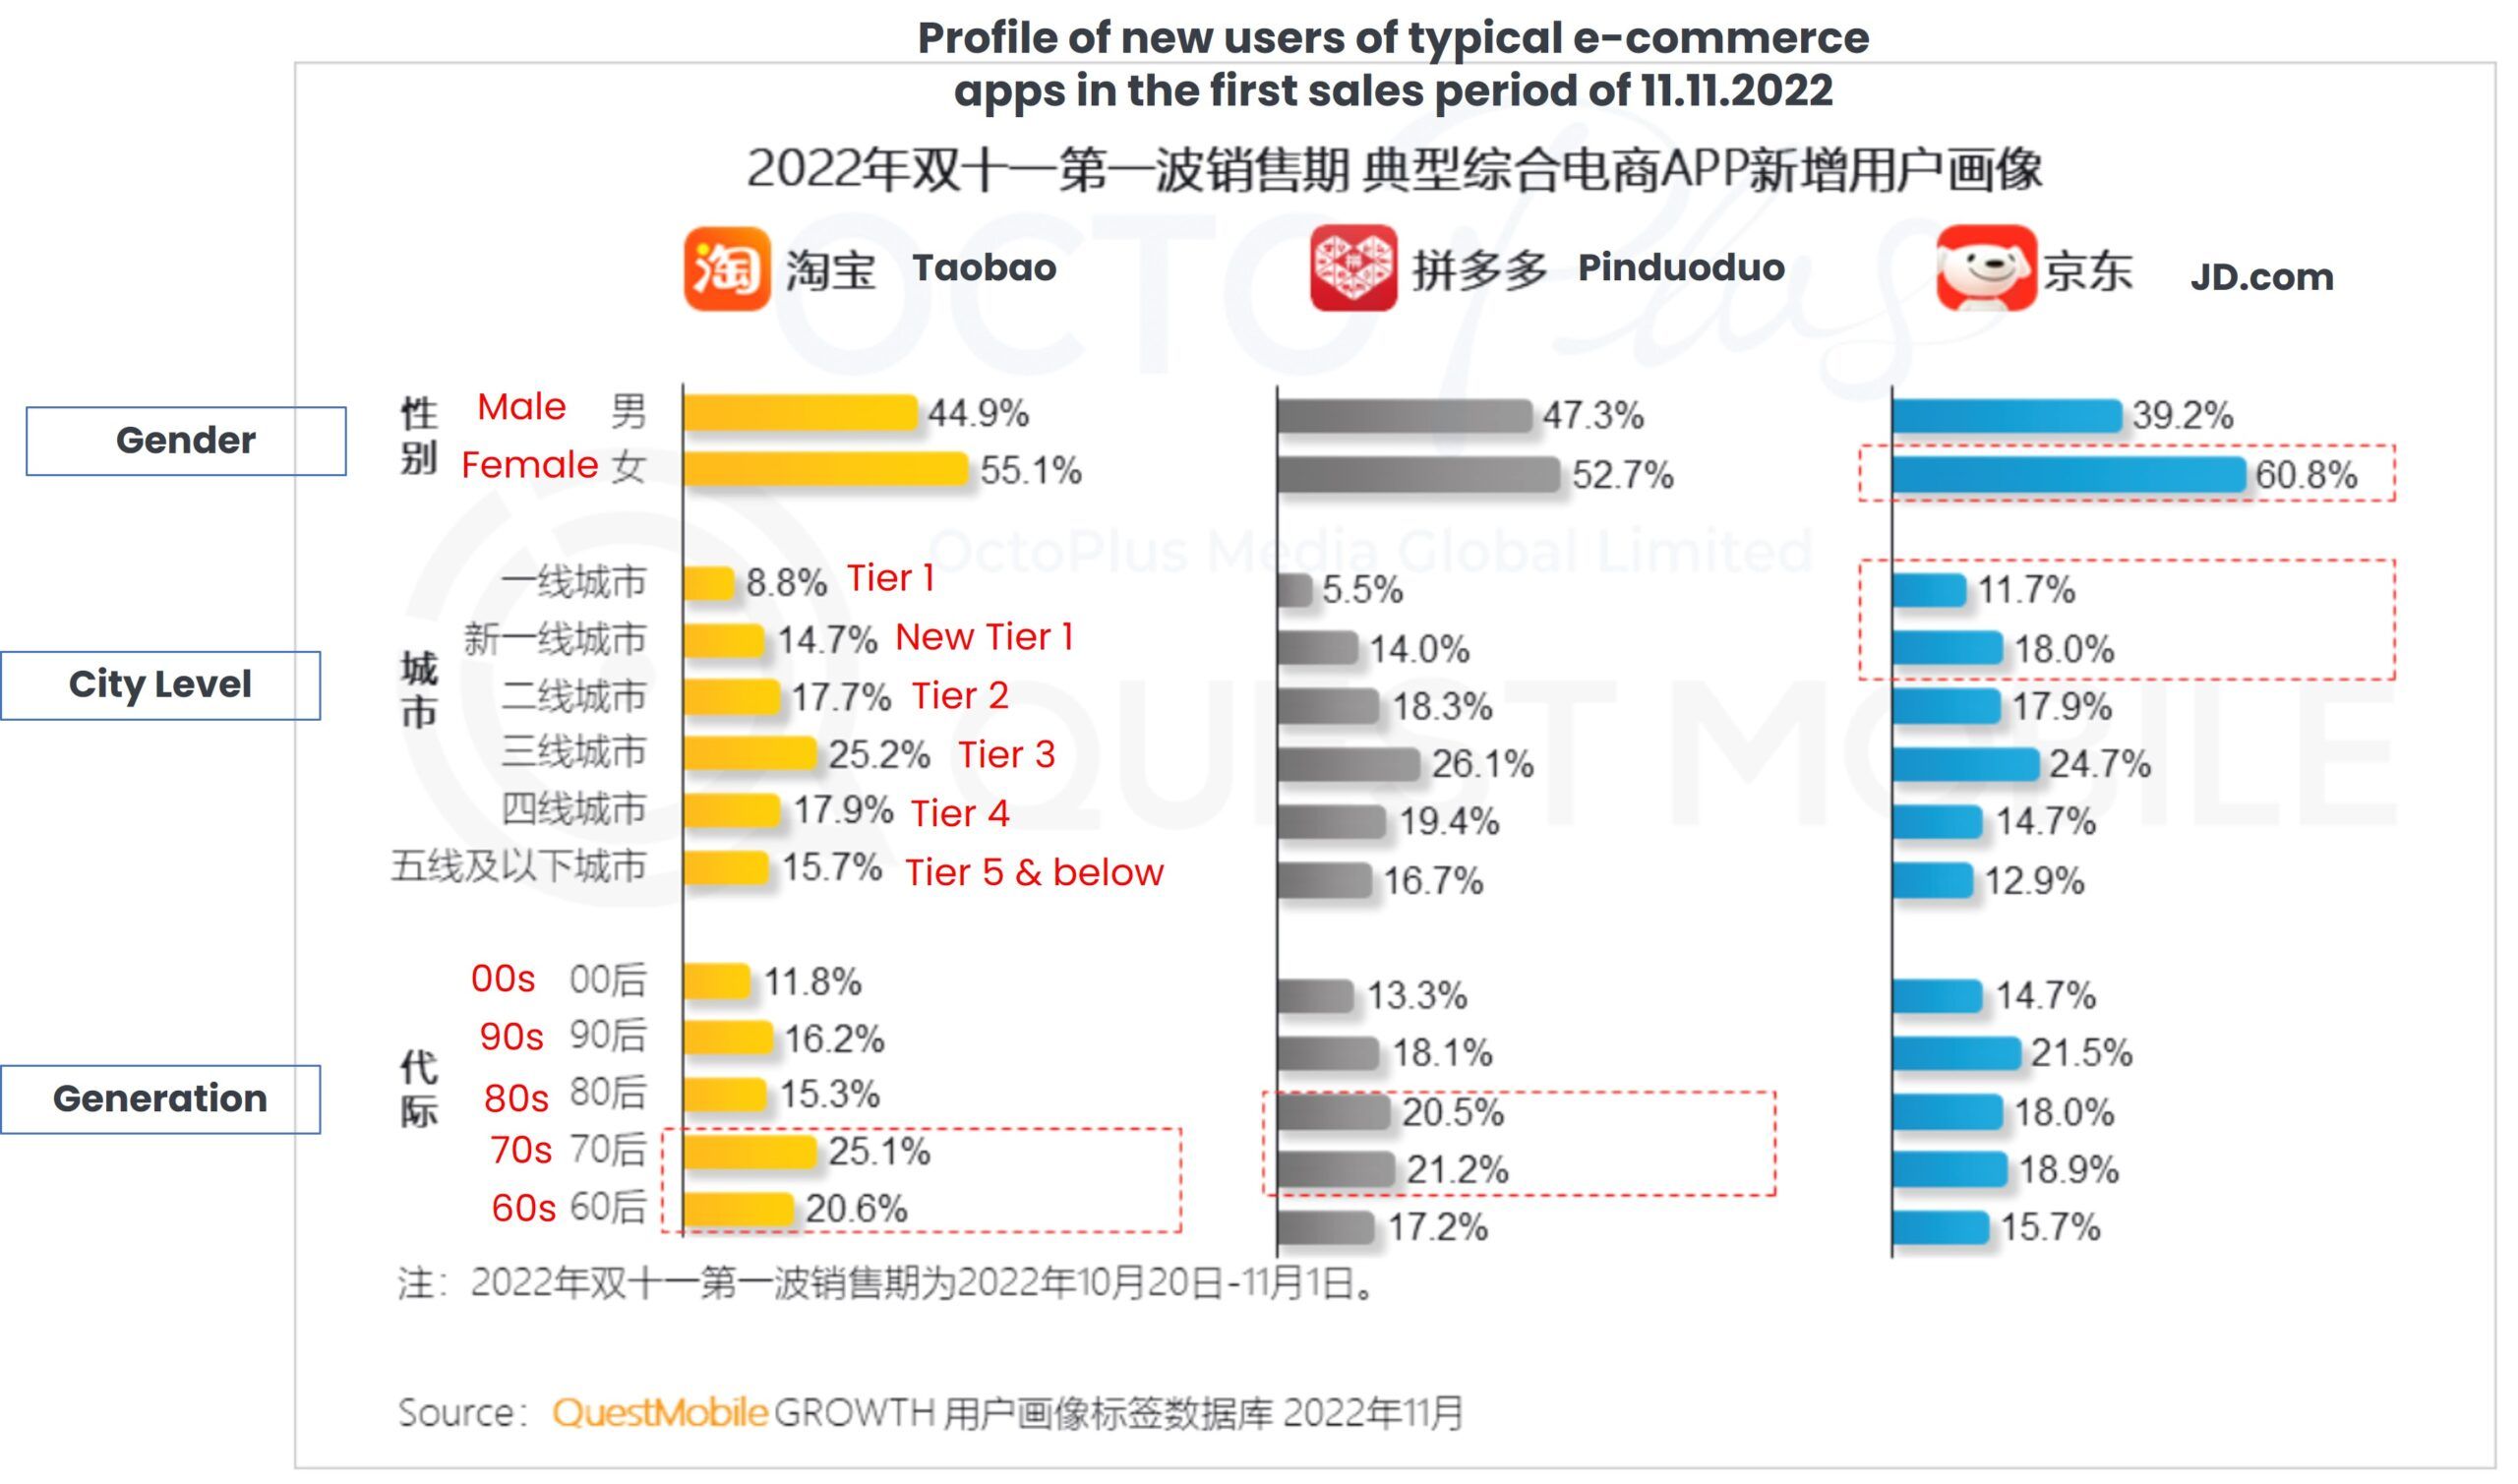 2022 China 11.11 Insight Report - Profile of new users of typical e-commerce apps in the first sales period of 11.11.2022